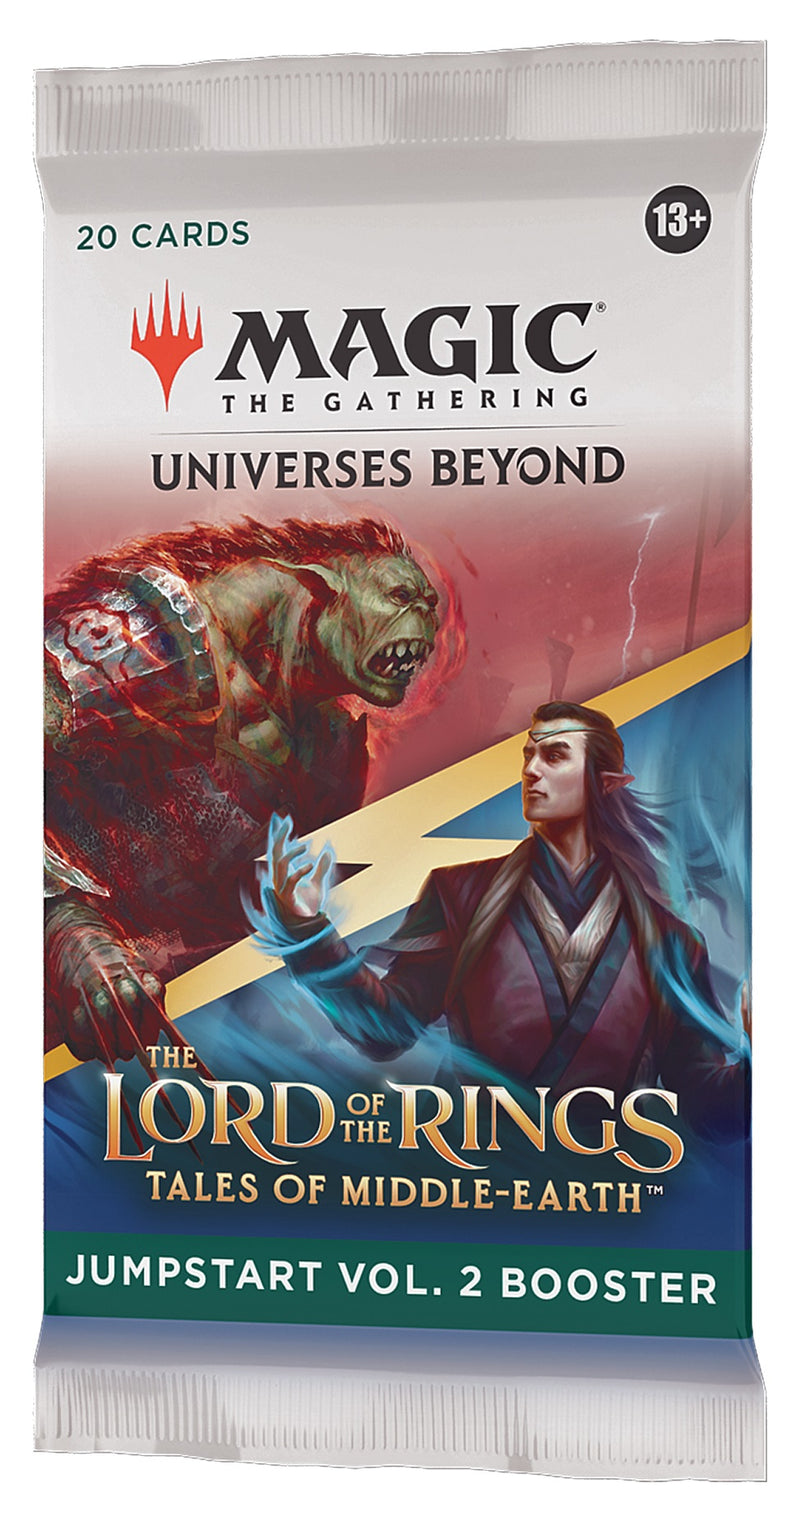 The Lord of the Rings: Tales of Middle-Earth: Jumpstart Vol. 2 Booster Box